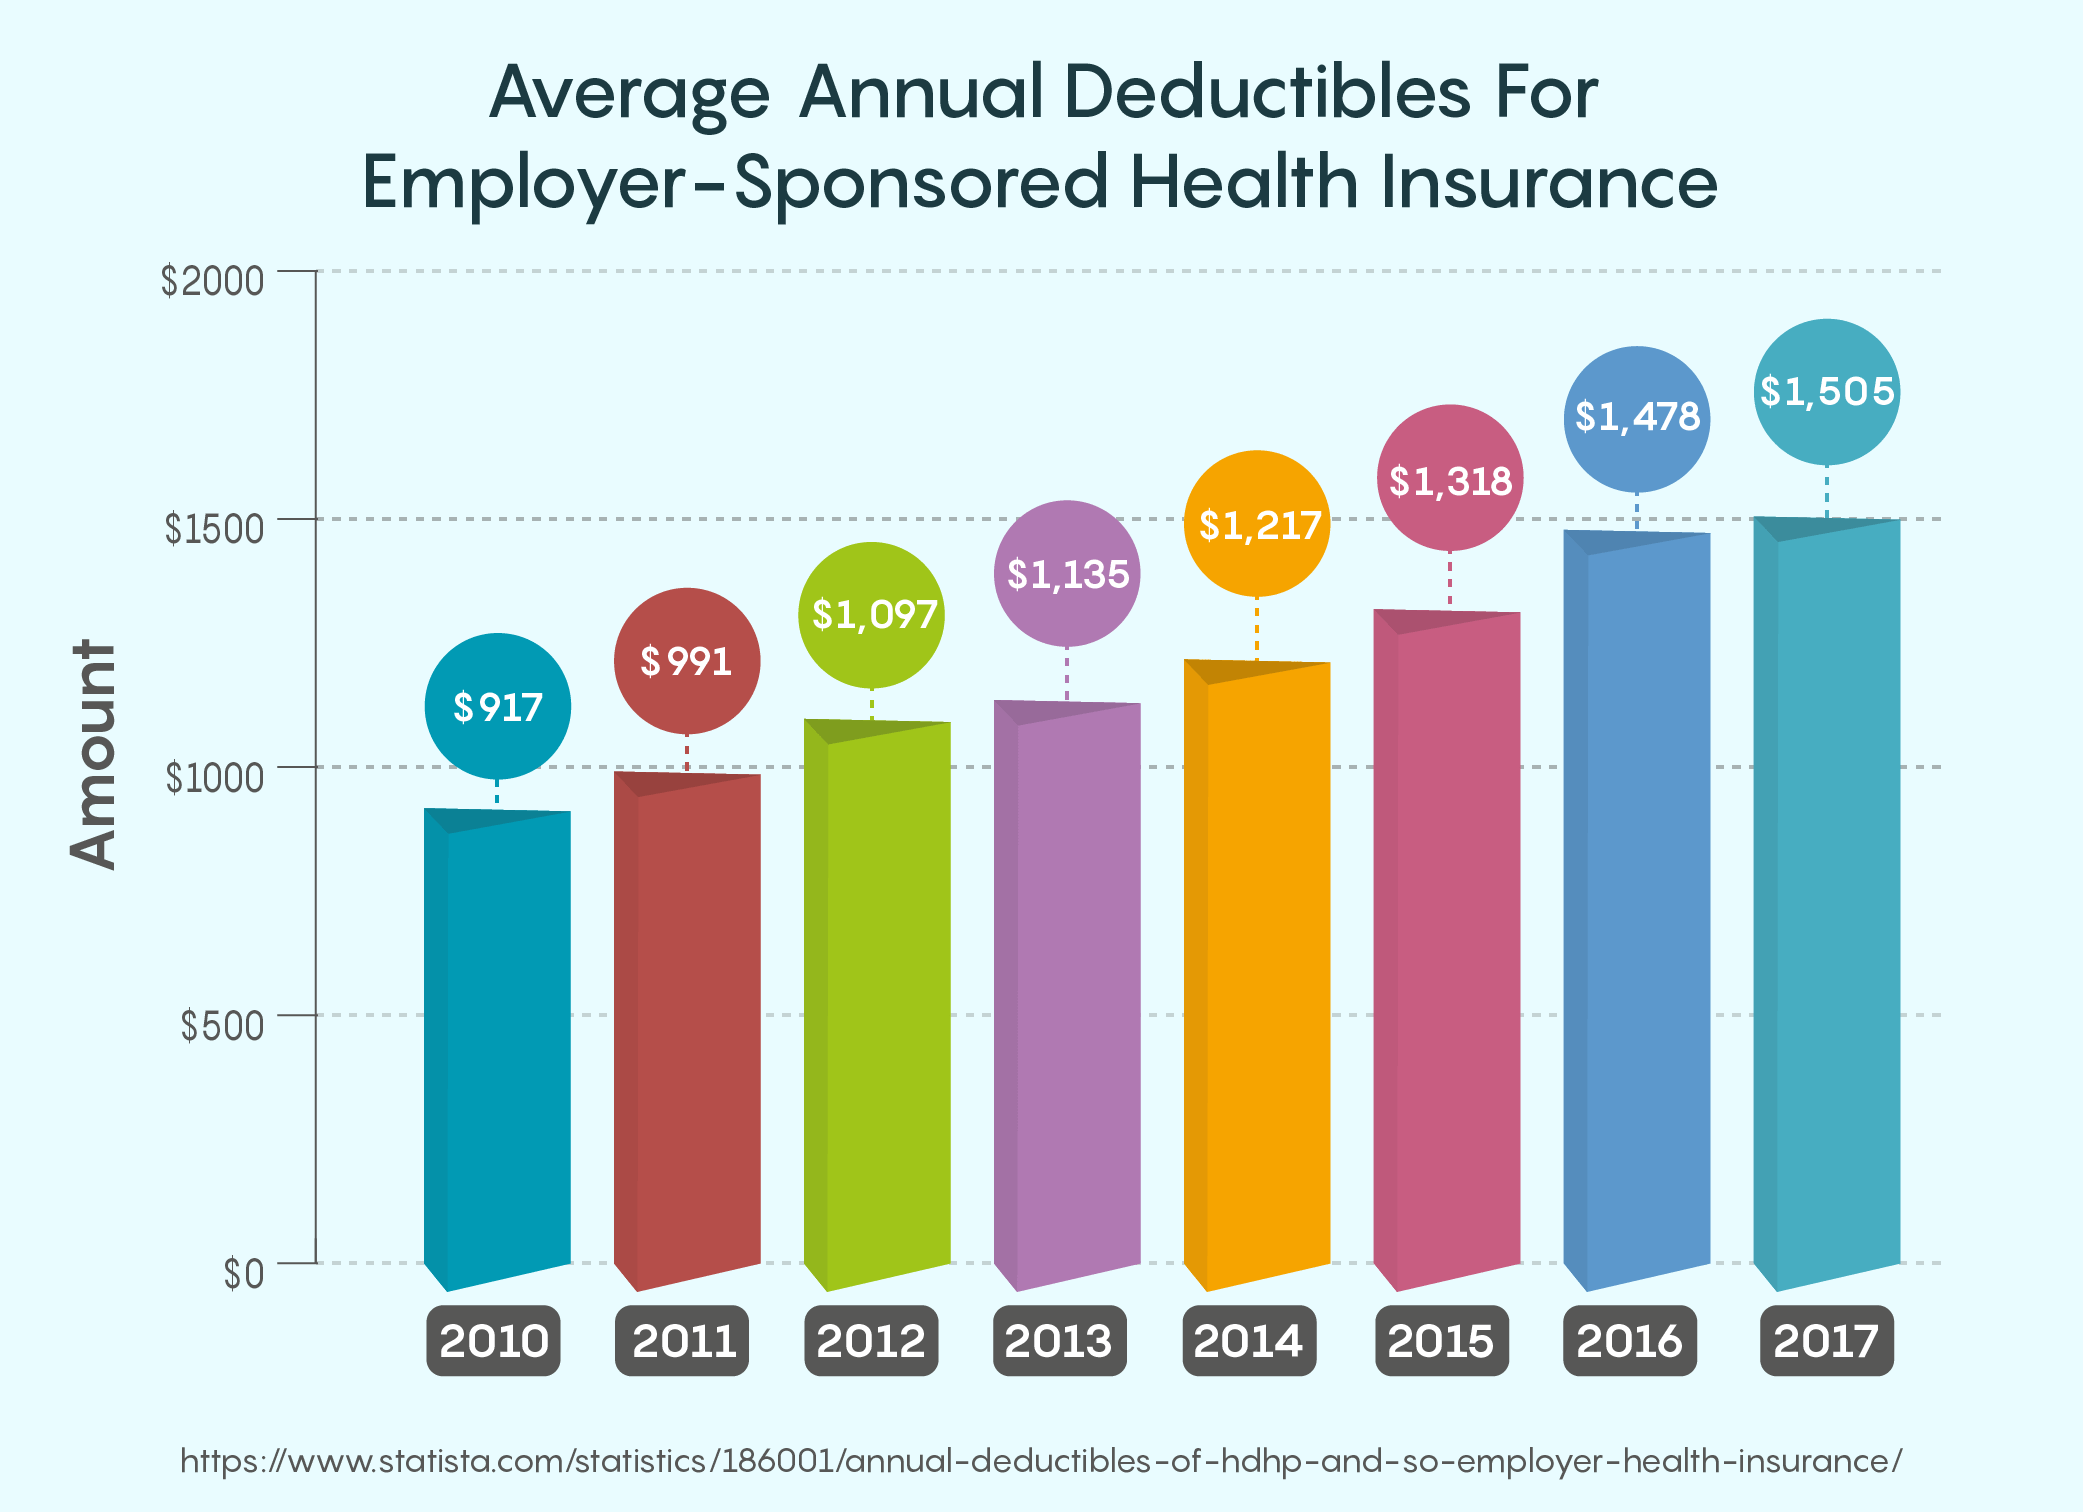 Average Annual Deductibles For Employer-Sponsored Health Insurance